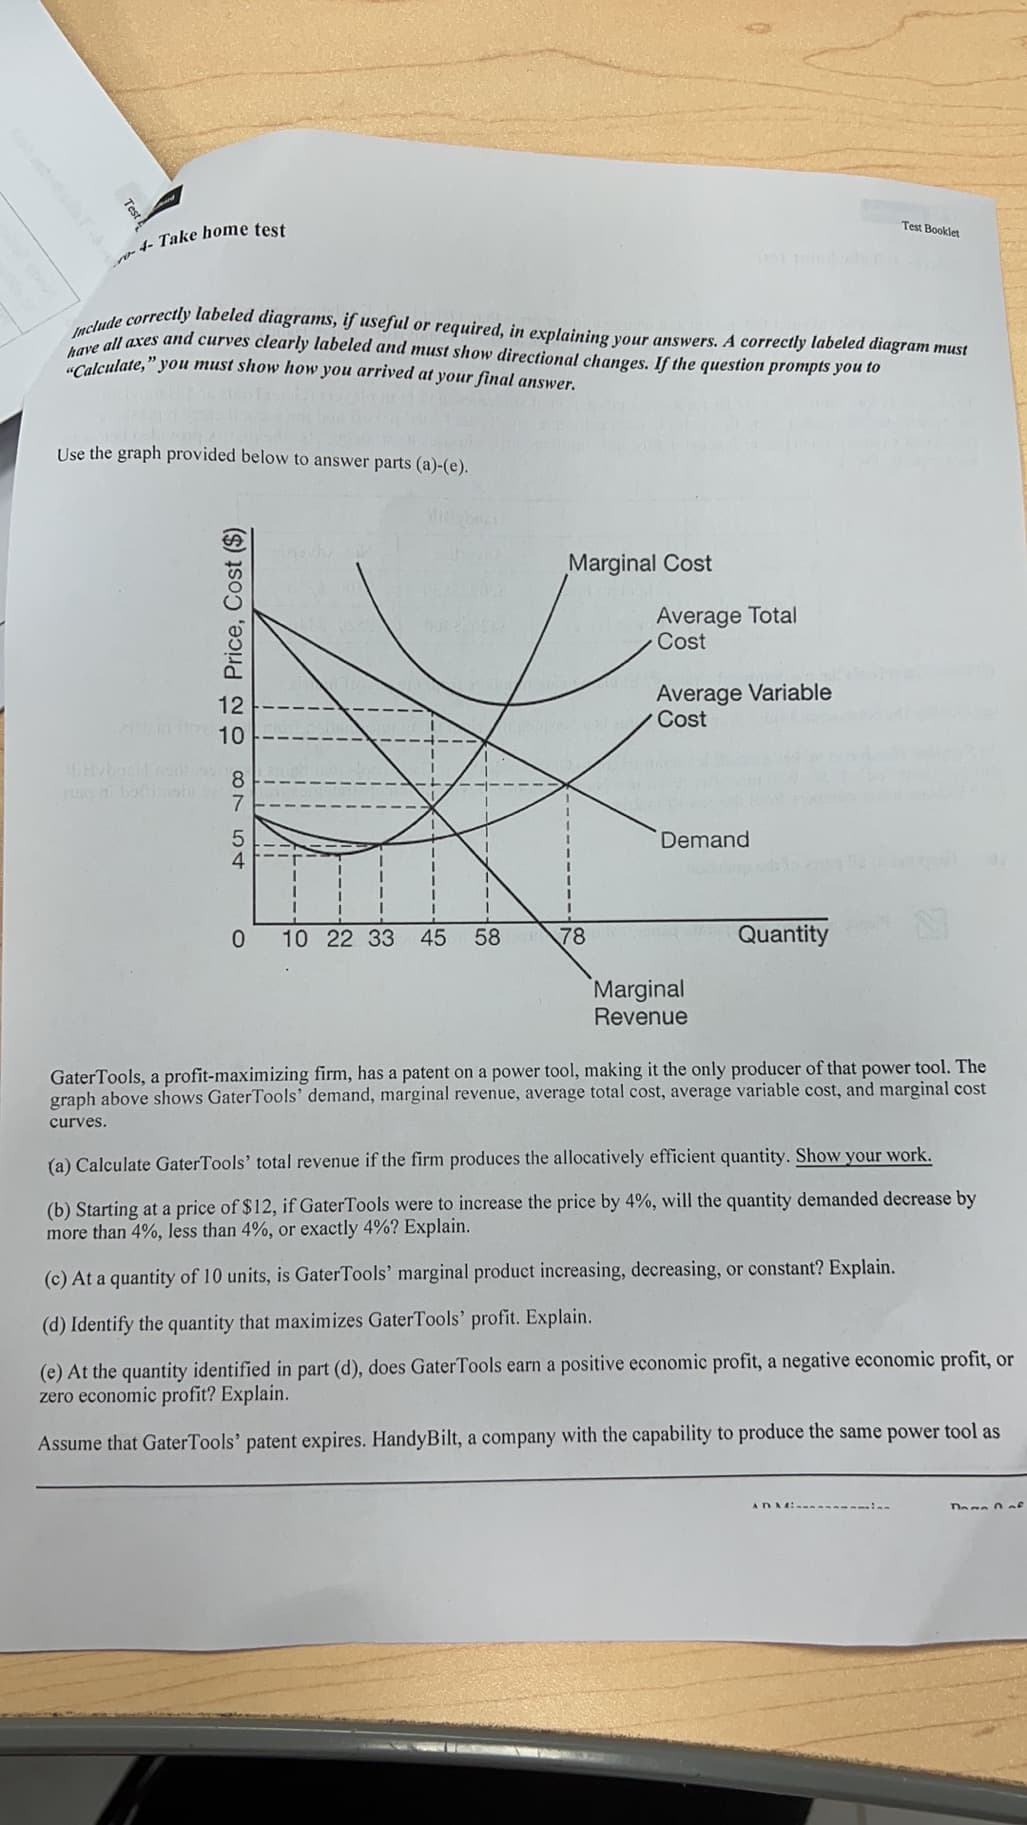 Include correctly labeled diagrams, if useful or required, in explaining your answers. A correctly labeled diagram must
"Calculate," you must show how you arrived at your final answer.
have all axes and curves clearly labeled and must show directional changes. If the question prompts you to
Test
Test Booklet
Use the graph provided below to answer parts (a)-(e).
Marginal Cost
Average Total
Cost
Average Variable
Cost
12
10
8.
a bo shi
Demand
10 22 33
45
58
78
Quantity
Marginal
Revenue
GaterTools, a profit-maximizing firm, has a patent on a power tool, making it the only producer of that power tool. The
graph above shows GaterTools' demand, marginal revenue, average total cost, average variable cost, and marginal cost
curves.
(a) Calculate GaterTools' total revenue if the firm produces the allocatively efficient quantity. Show your work.
(b) Starting at a price of $12, if GaterTools were to increase the price by 4%, will the quantity demanded decrease by
more than 4%, less than 4%, or exactly 4%? Explain.
(c) At a quantity of 10 units, is GaterTools' marginal product increasing, decreasing, or constant? Explain.
(d) Identify the quantity that maximizes GaterTools' profit. Explain.
(e) At the quantity identified in part (d), does GaterTools earn a positive economic profit, a negative economic profit, or
zero economic profit? Explain.
Assume that GaterTools' patent expires. HandyBilt, a company with the capability to produce the same power tool as
ADMi i
Dege 0of
O Price, Cost ($)
CON 54
